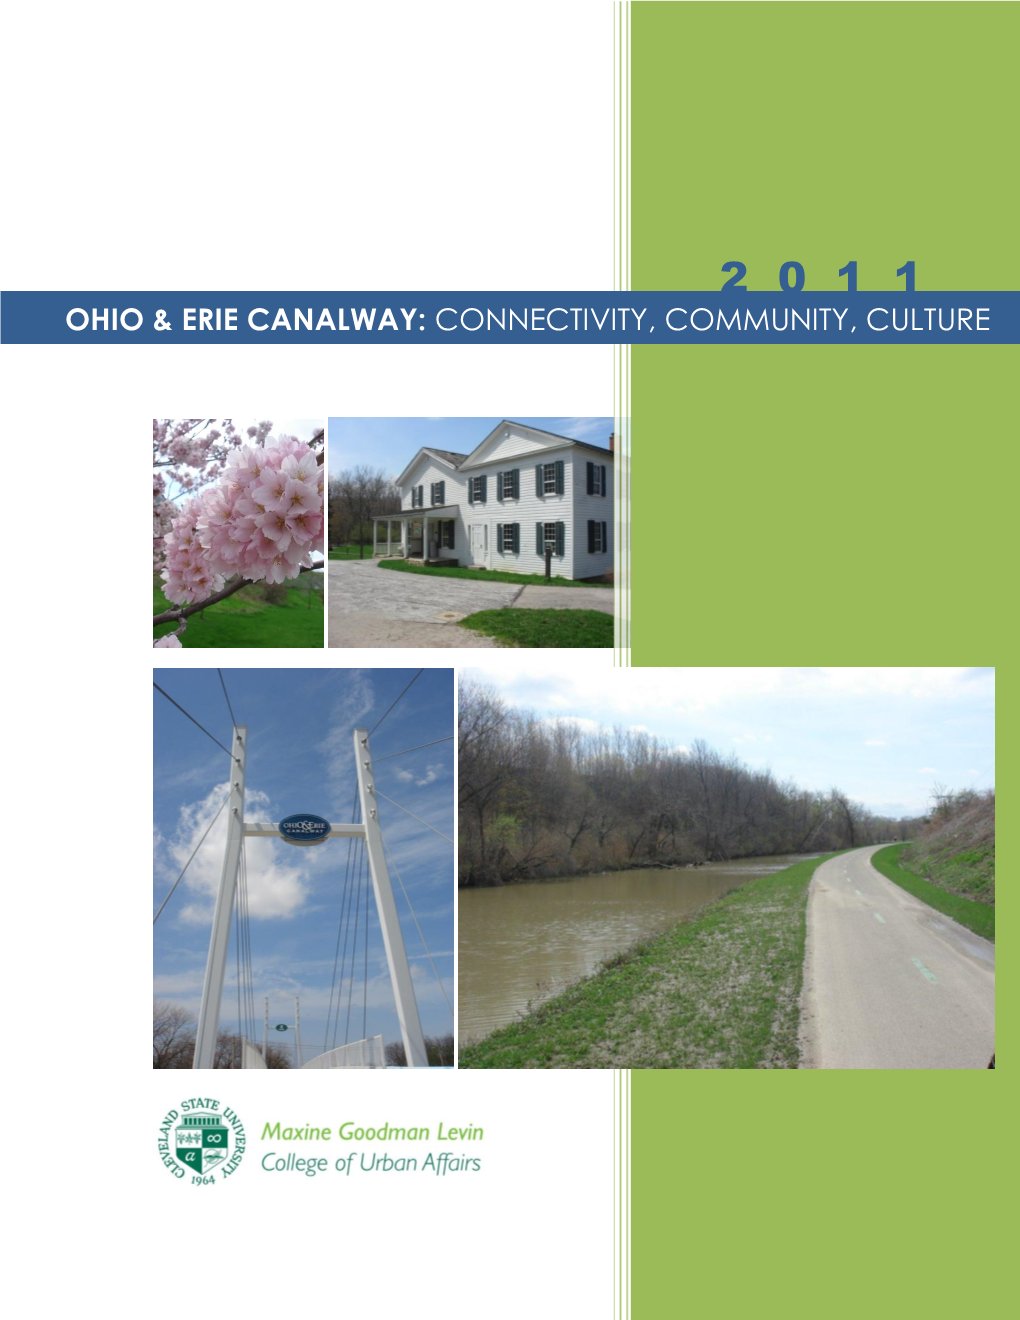 Ohio & Erie Canalway: Connectivity, Community, Culture